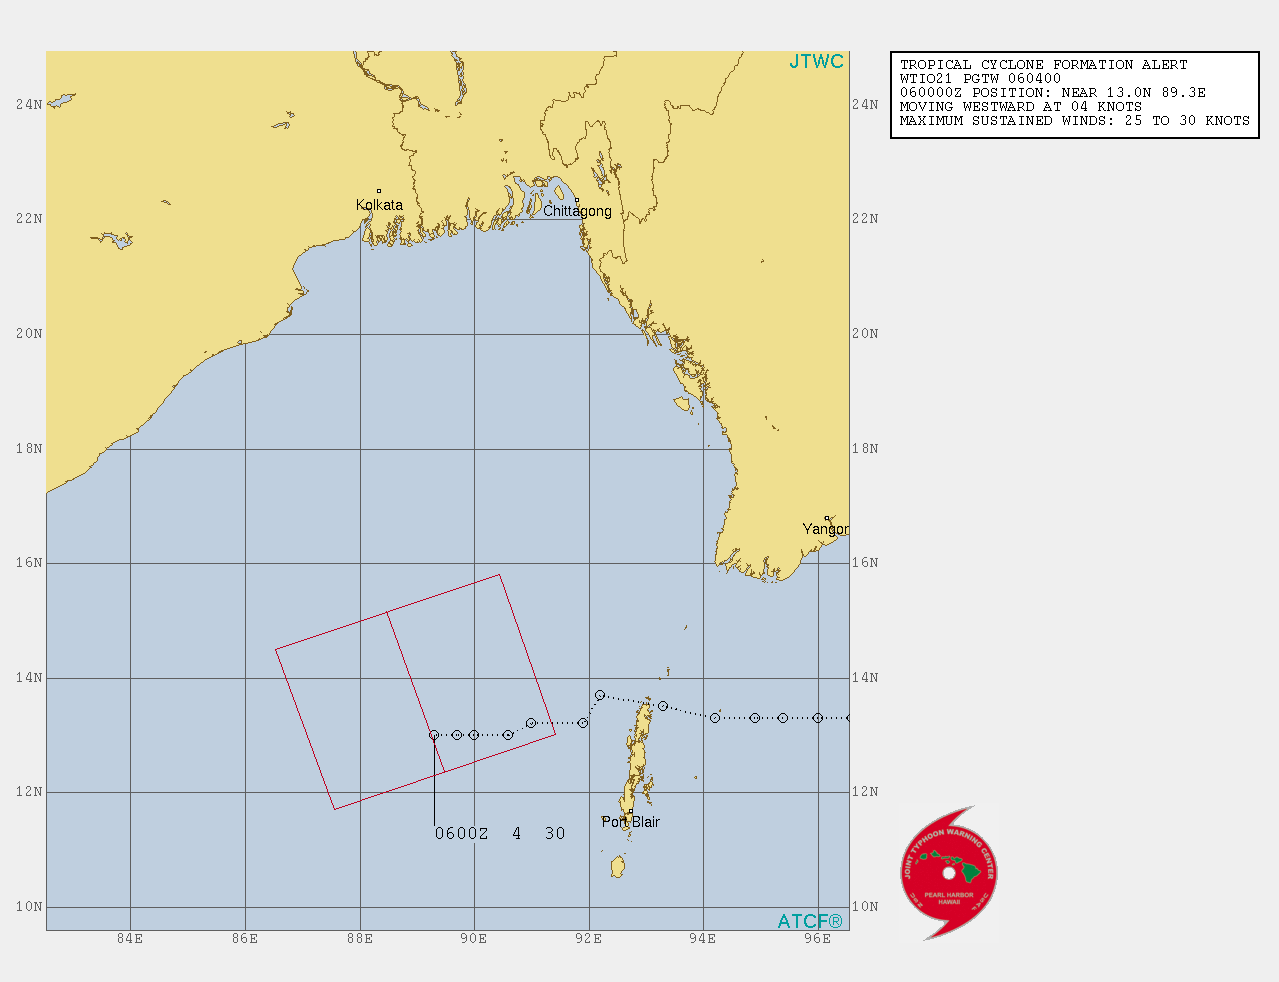 23W: TROPICAL CYCLONE FORMATION ALERT OVER THE BAY OF BENGAL